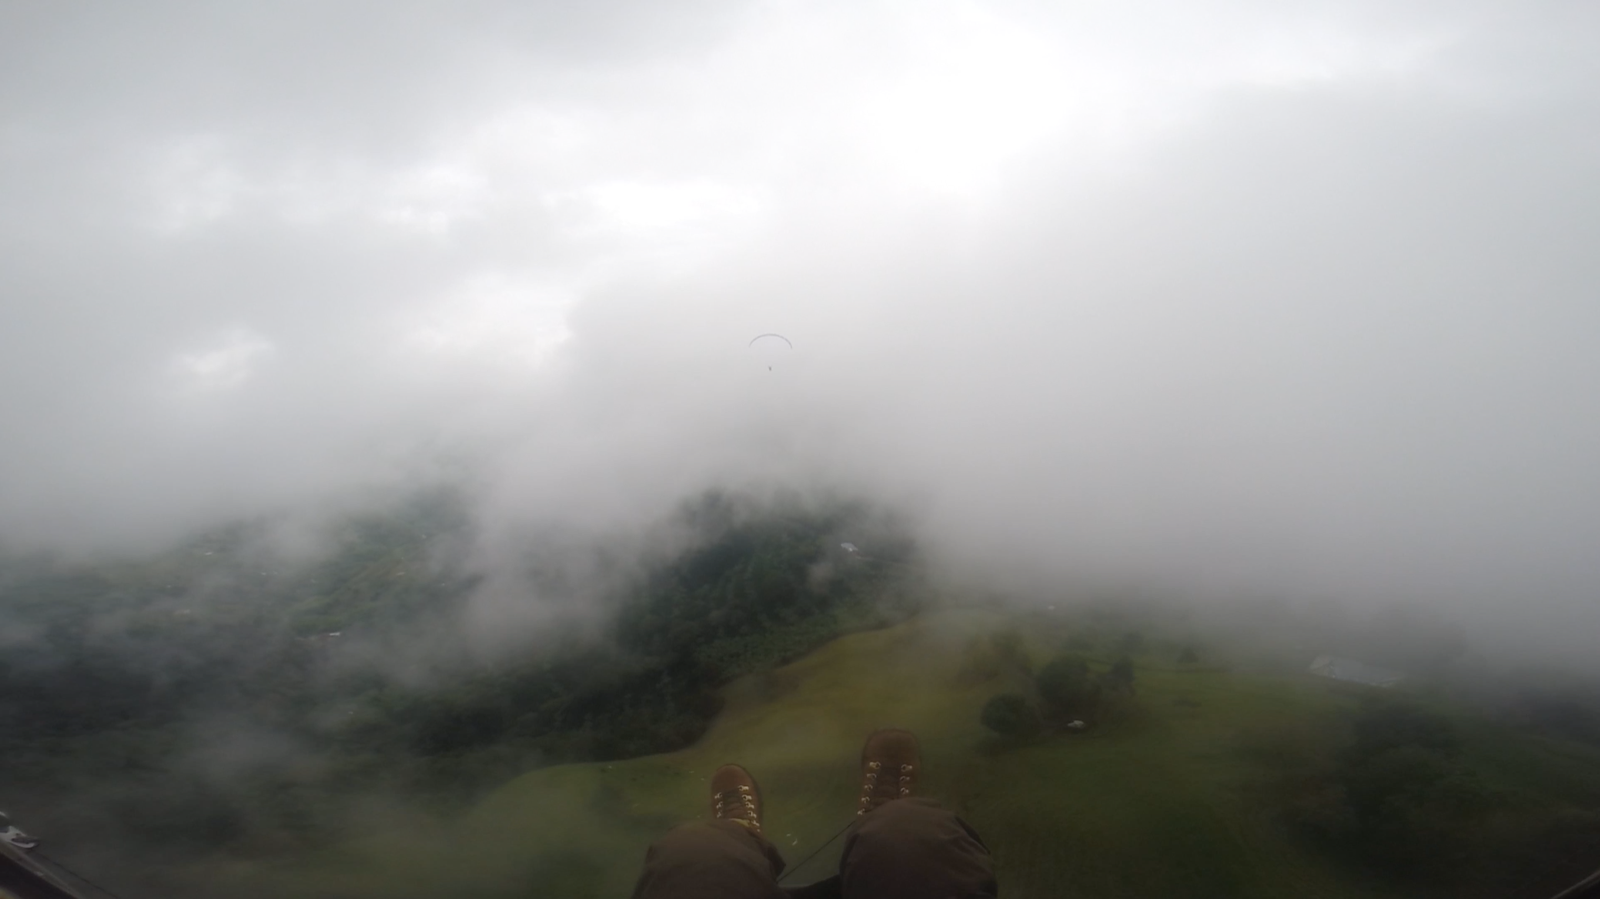 Feet in clouds, low